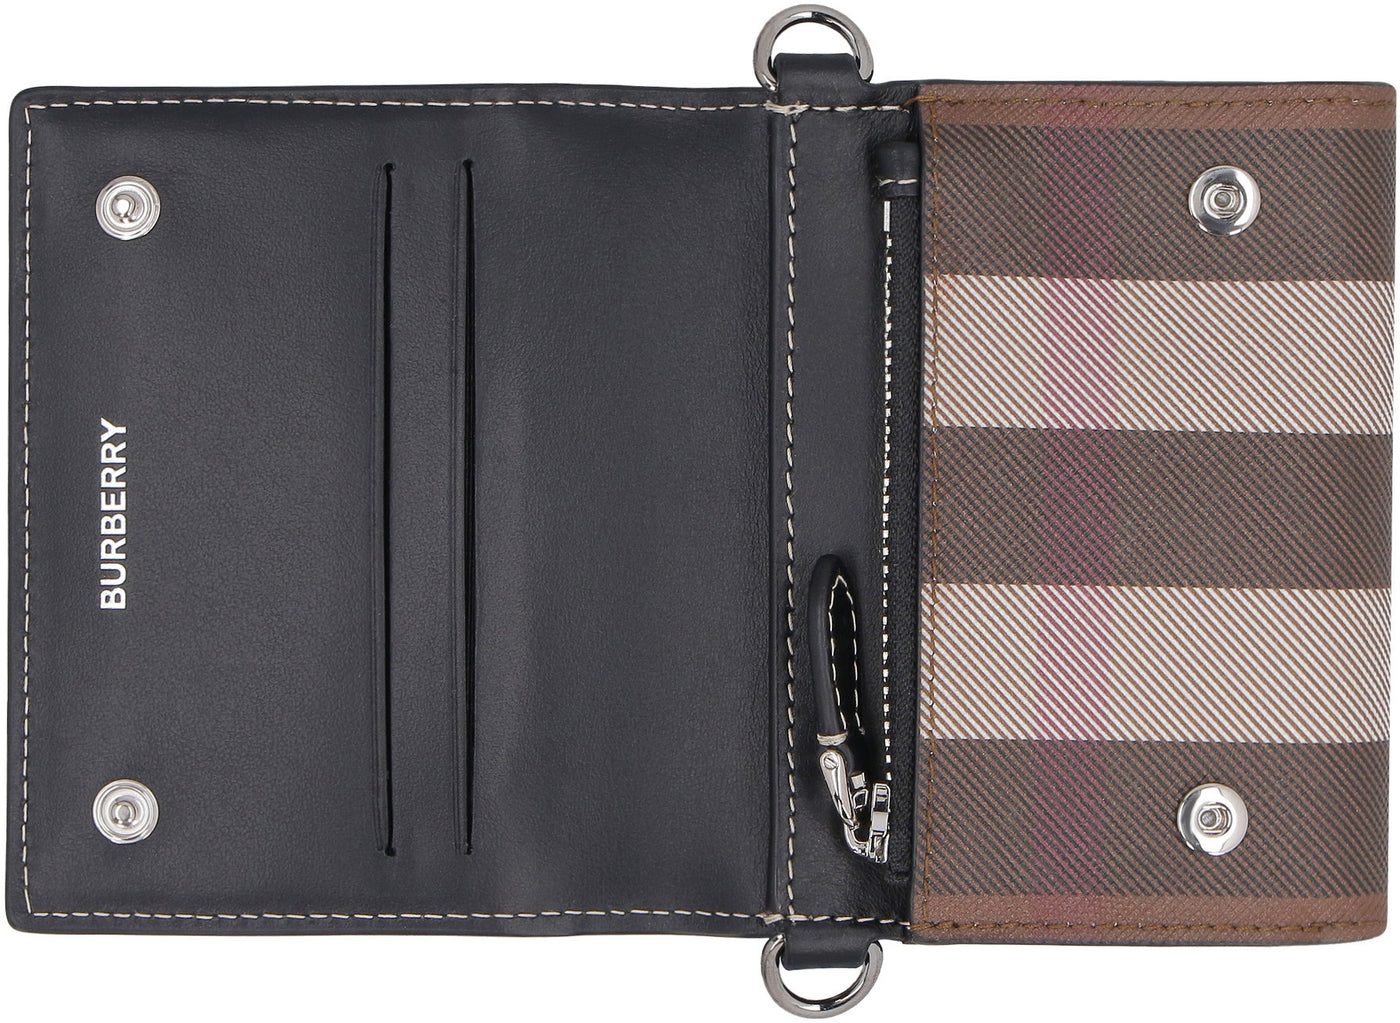 A8900 BURBERRY CHECKED WALLET WITH SHOULDER STRAP